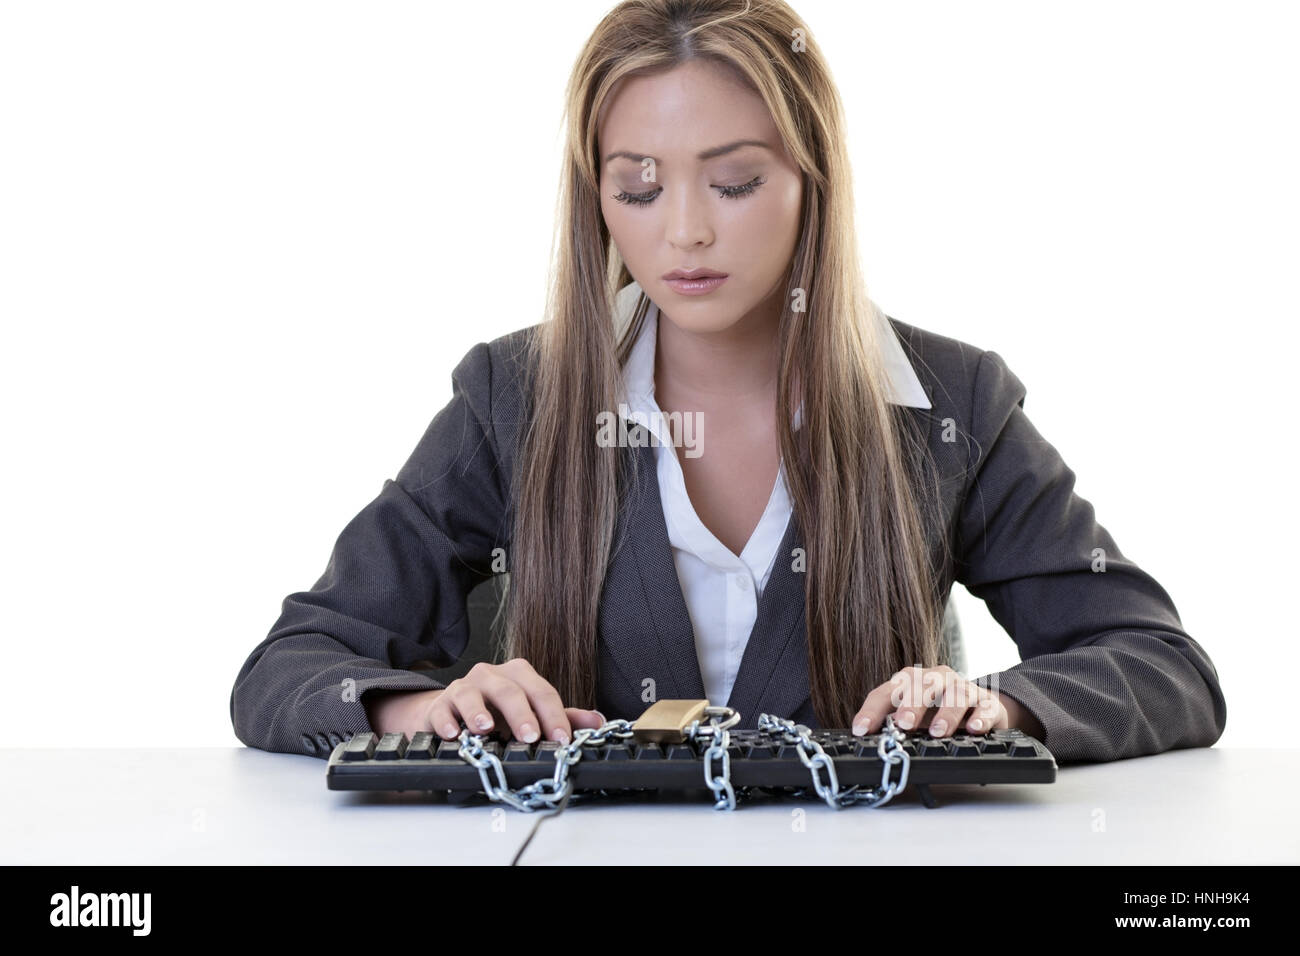 female business woman sitting at her desk locked out of computer Stock Photo